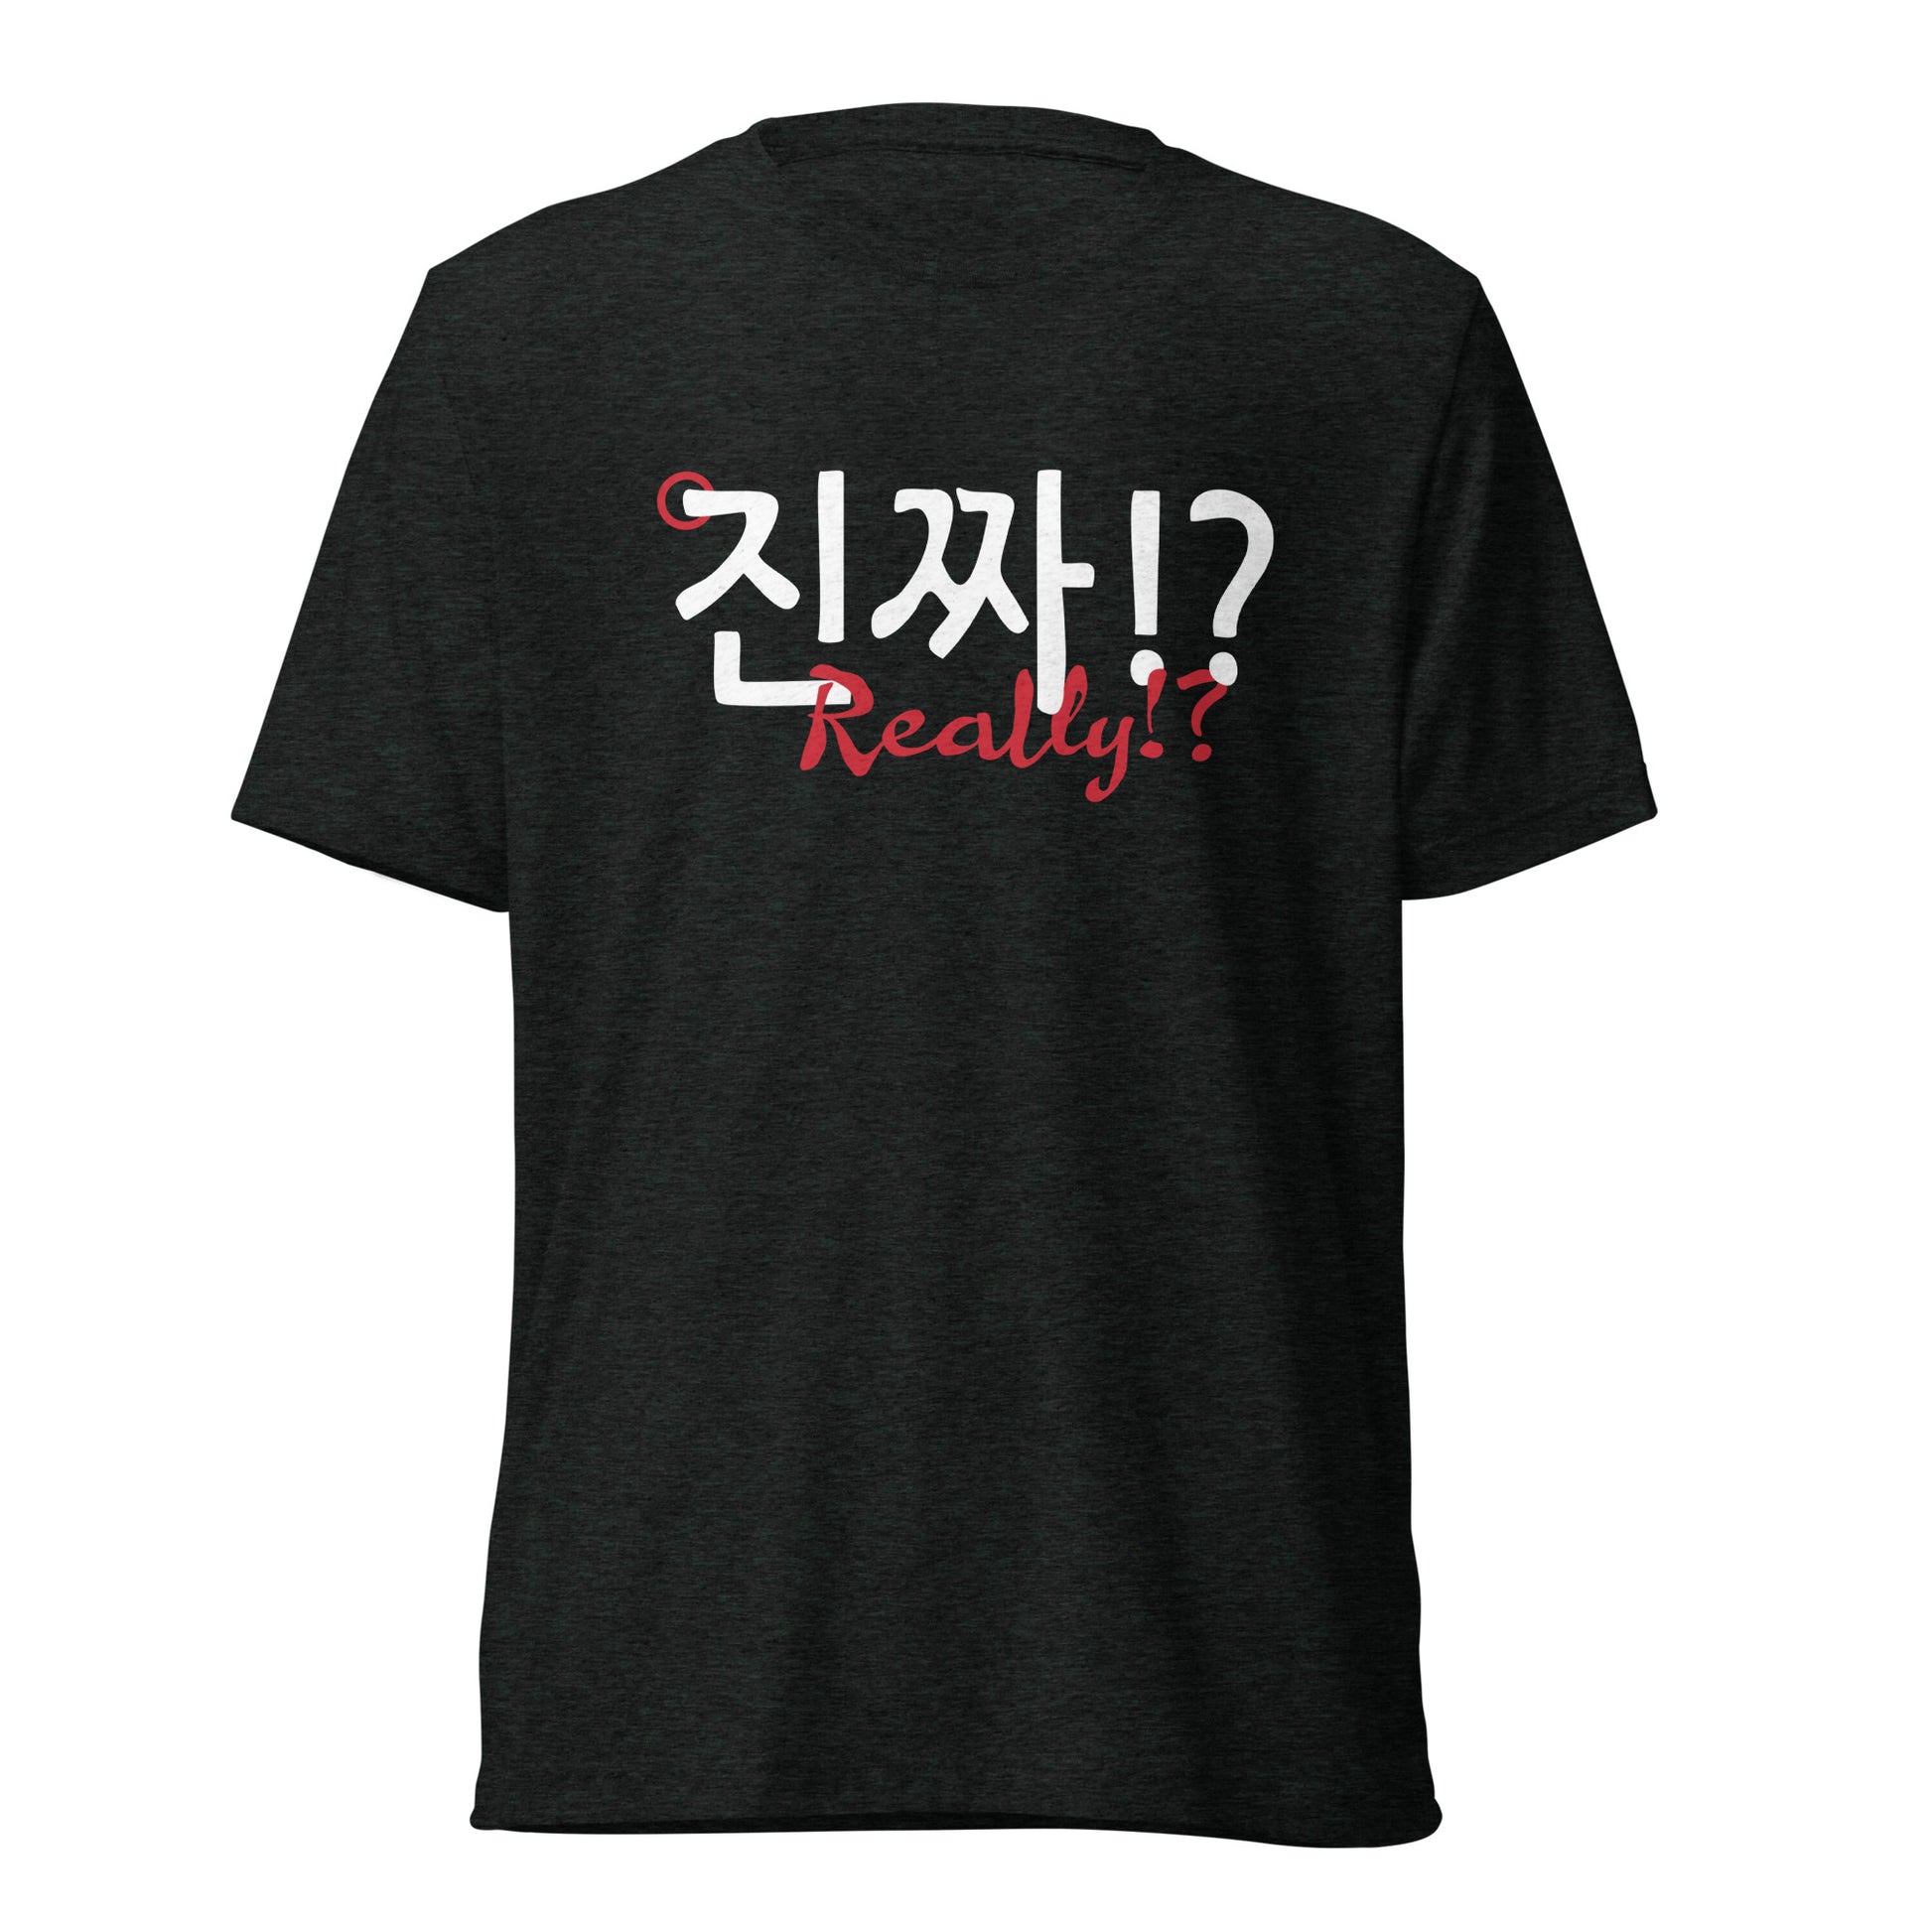 Charcoal black T-shirt with a large print on the front saying 'Really!?' in English and Hangul